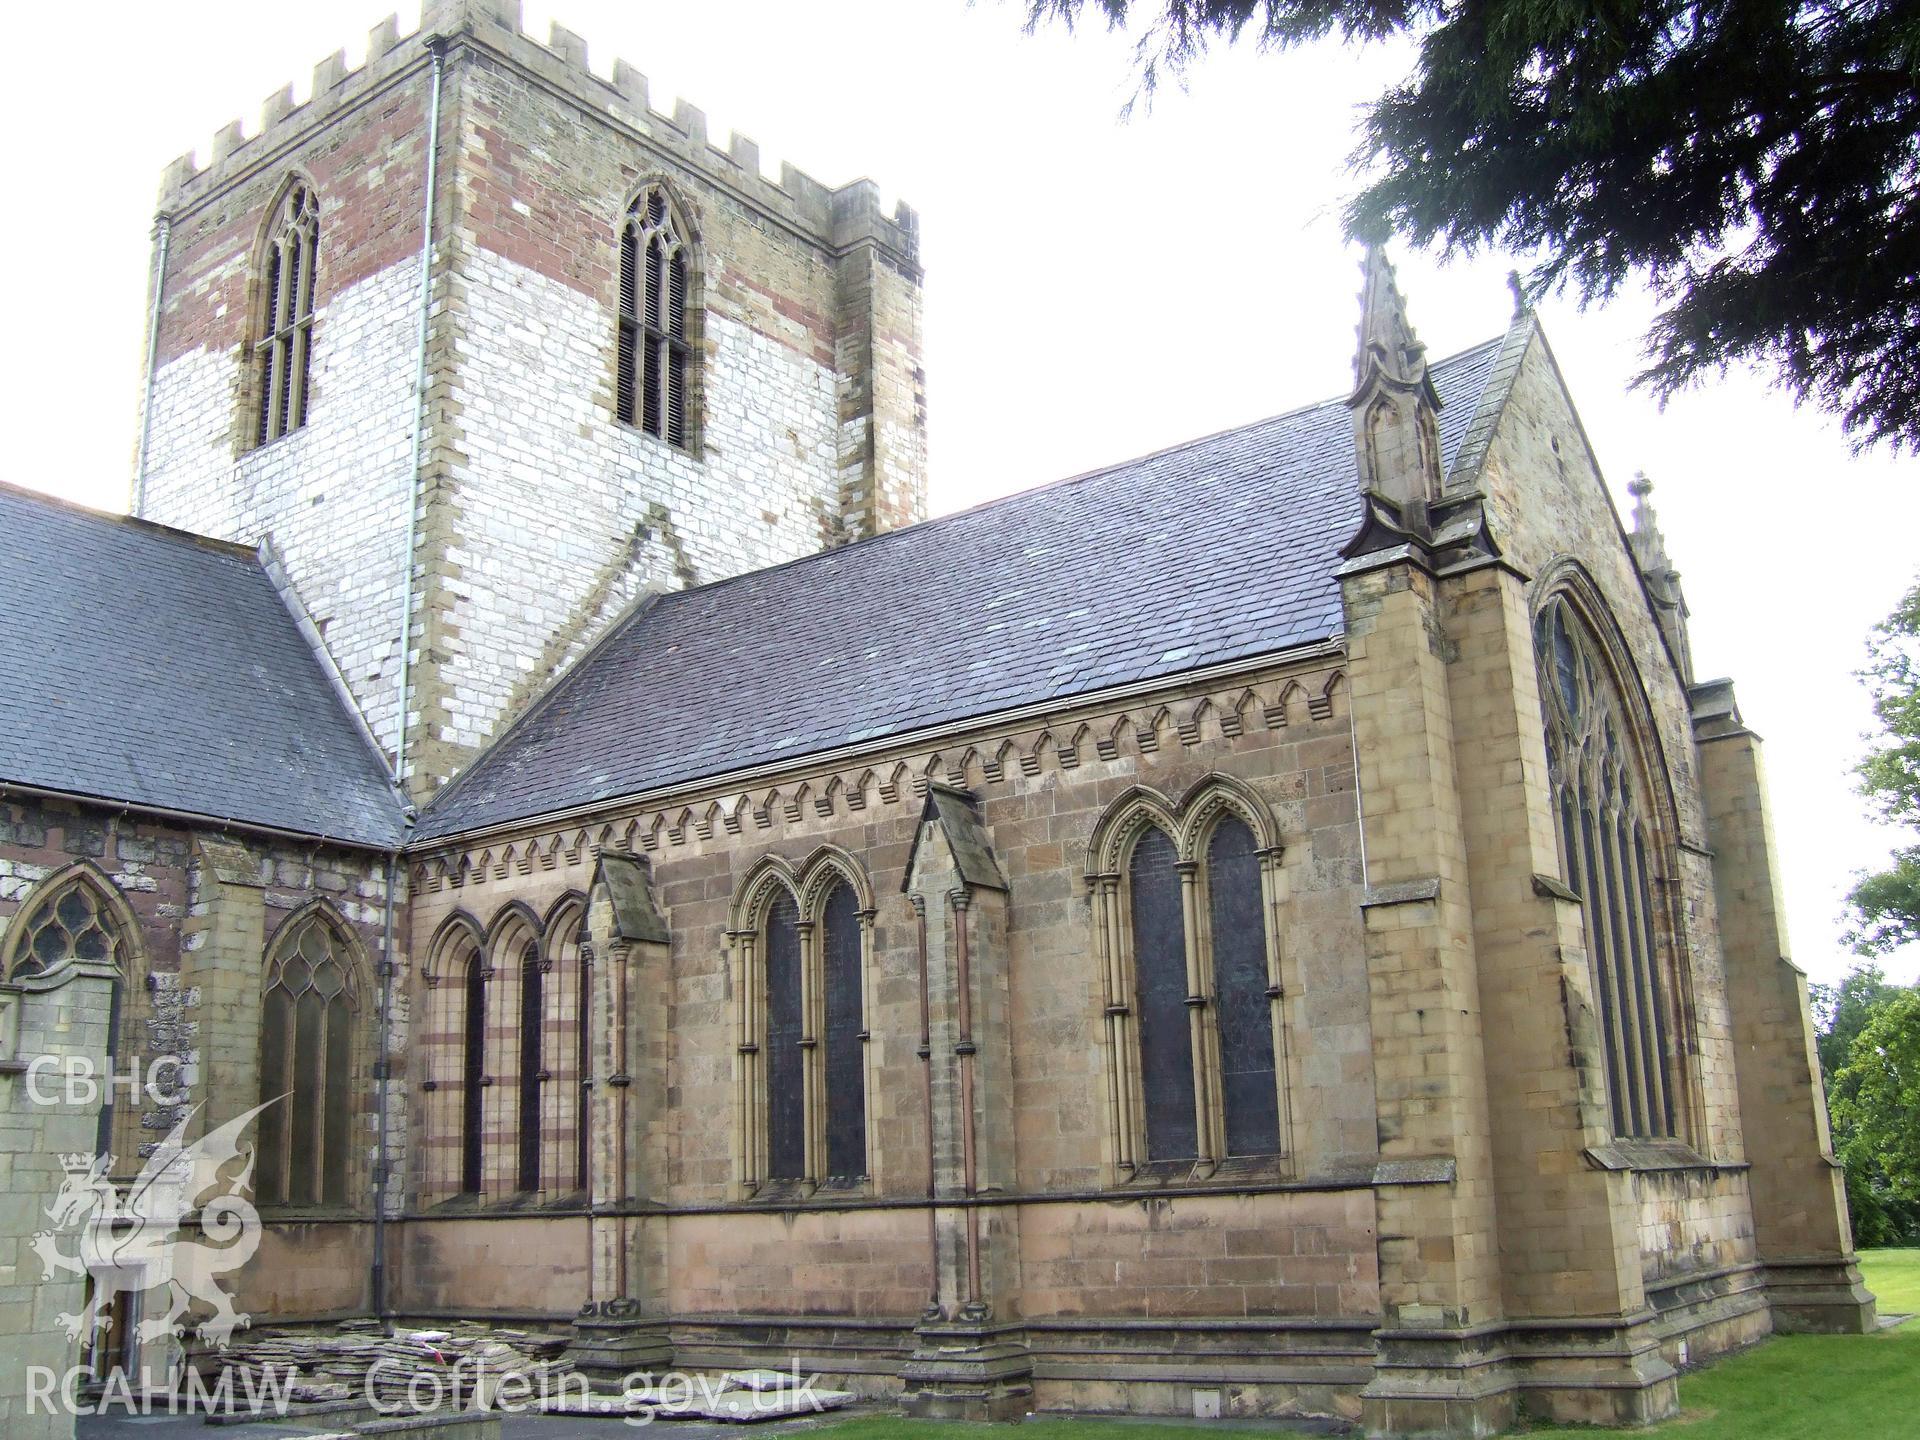 South-east side of chancel and the central tower from the east.